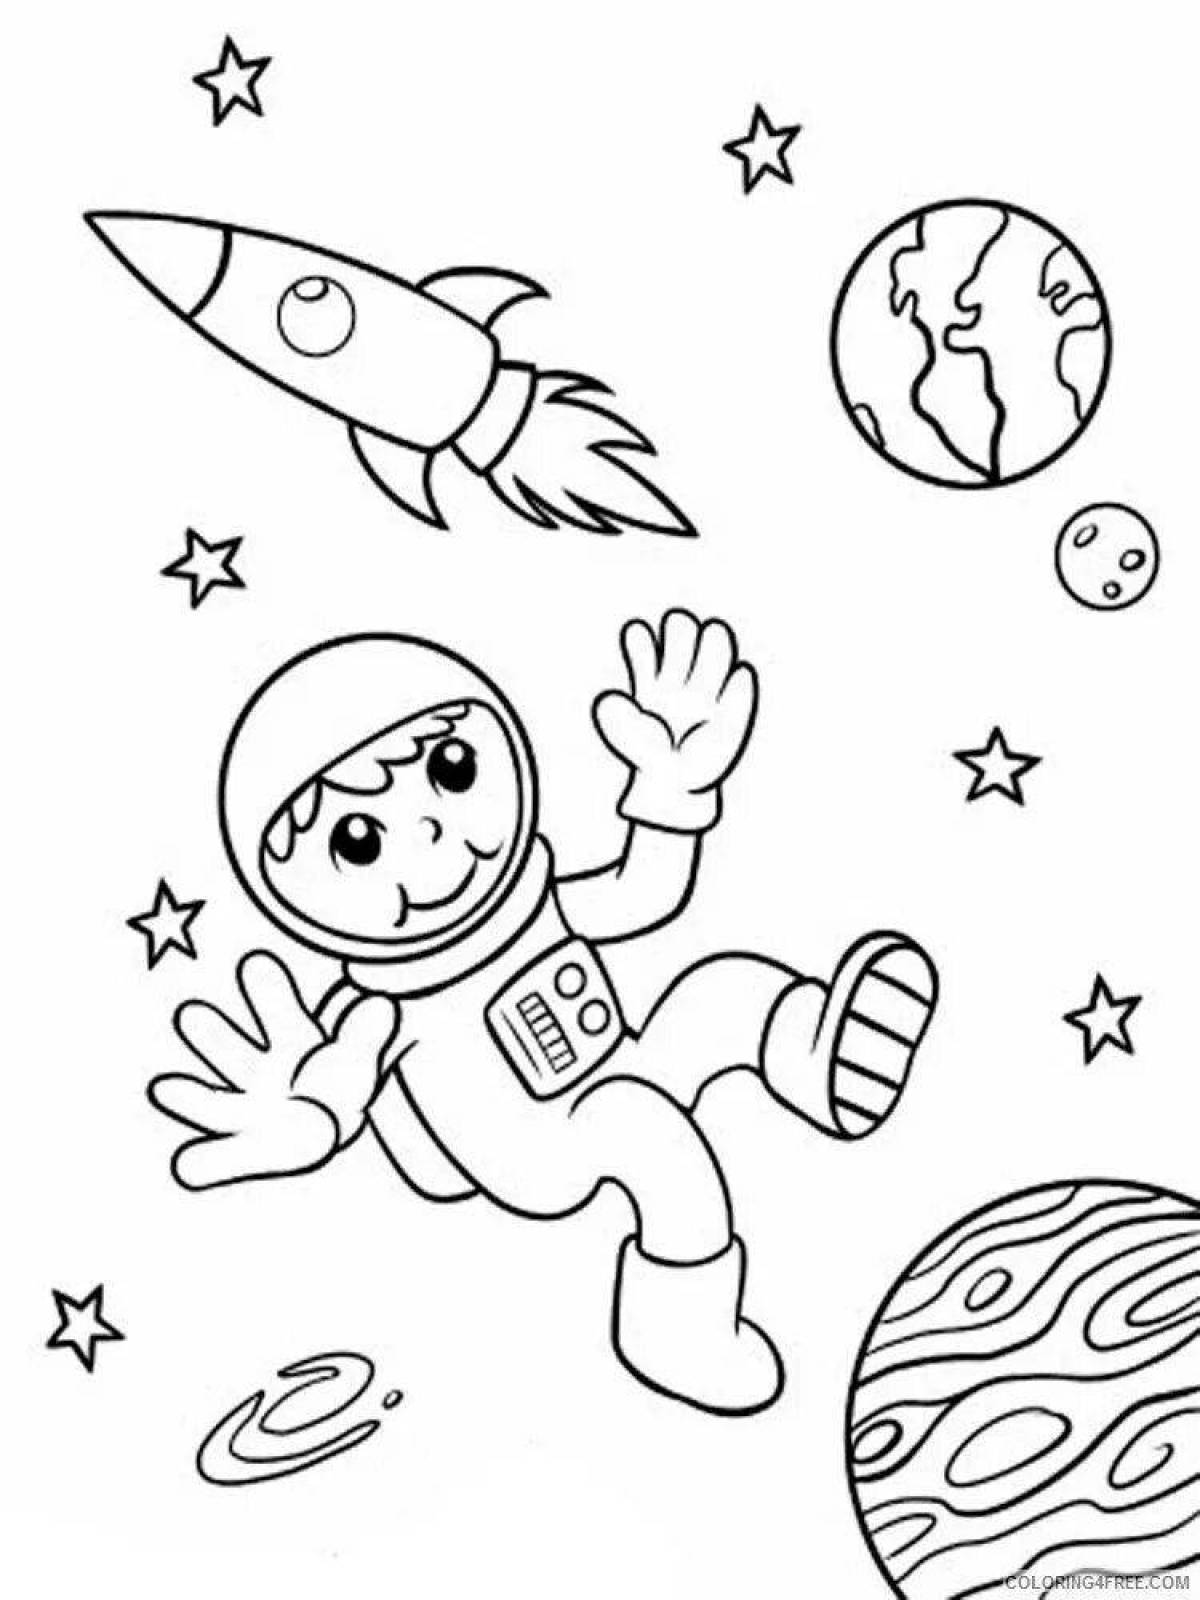 Dazzling space coloring book